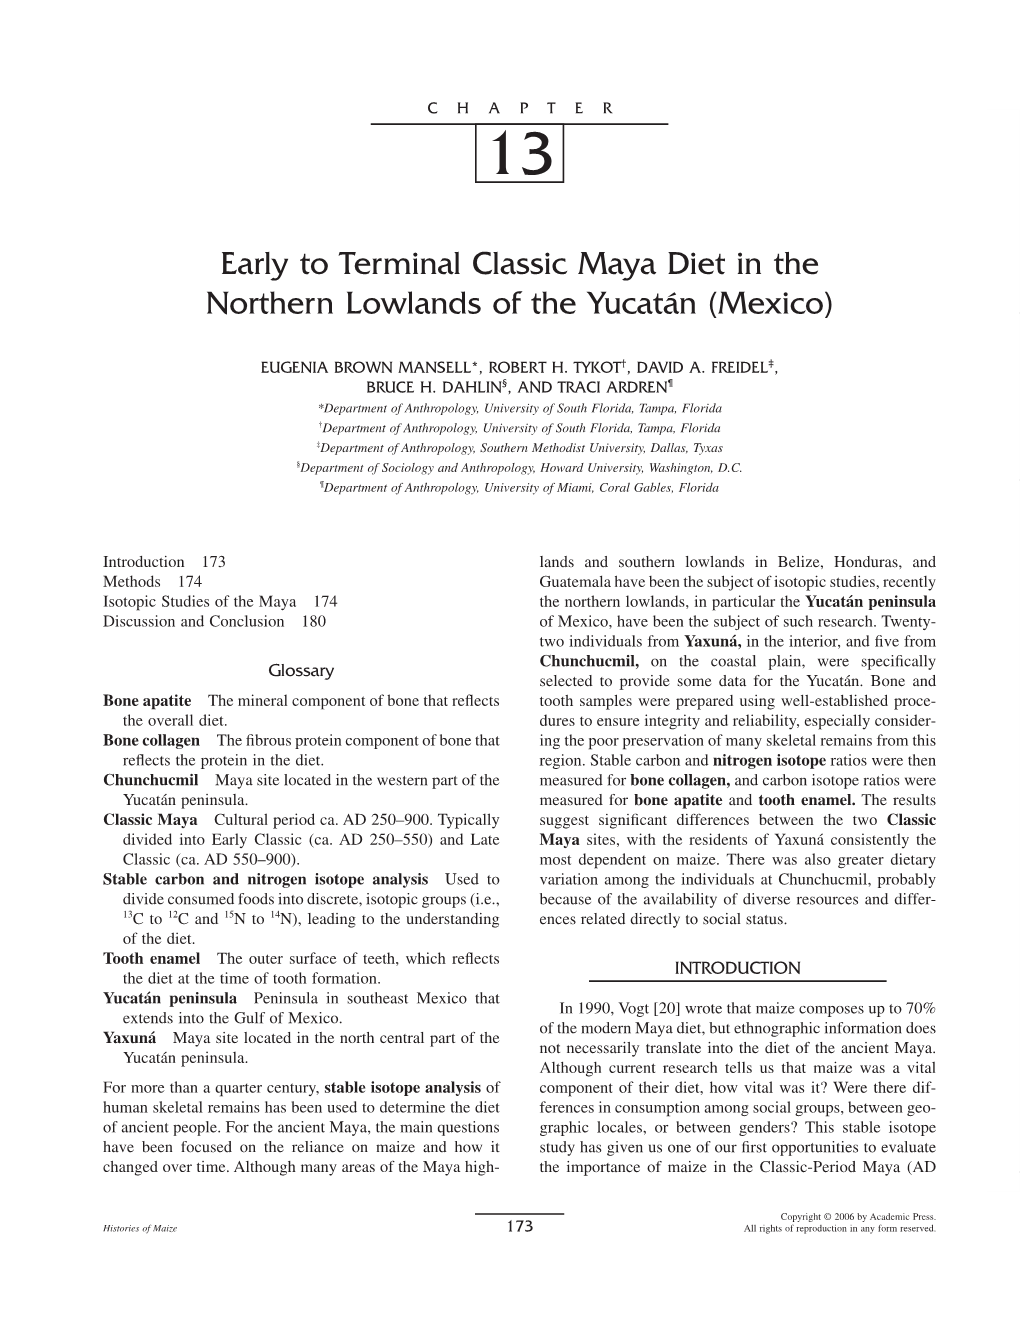 Early to Terminal Classic Maya Diet in the Northern Lowlands of the Yucatán (Mexico)